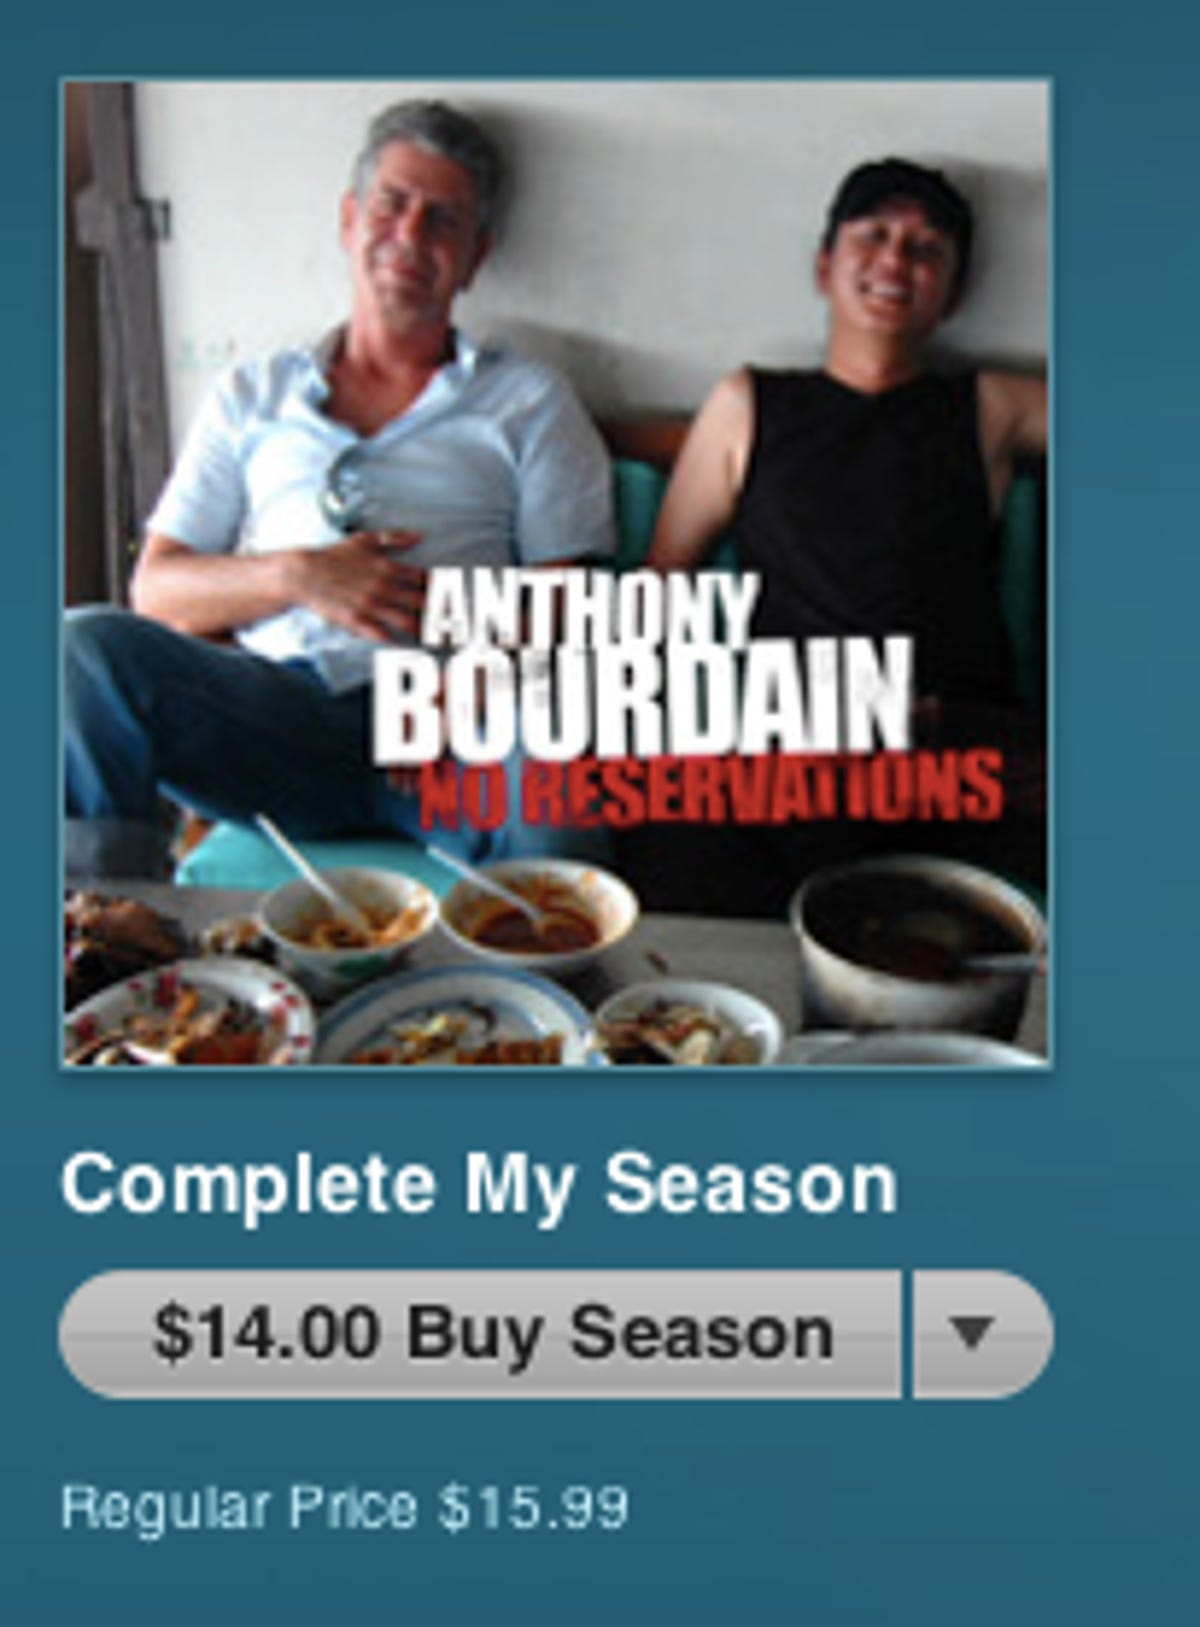 Bought a TV show from a series? Apple now offers the option to get the whole season at a discount.